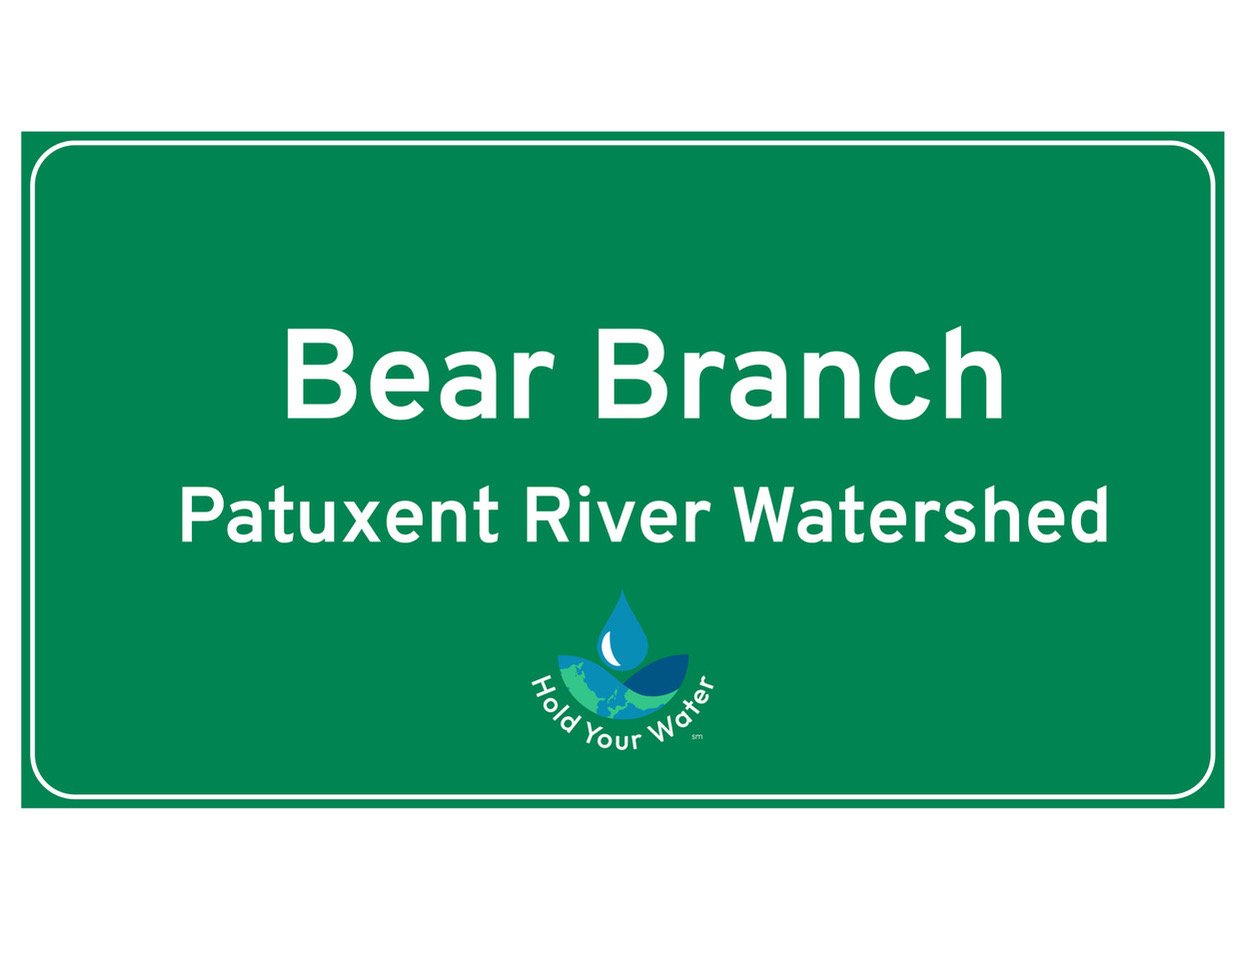 2022-05-17 Watershed Sign Concepts-01.jpeg